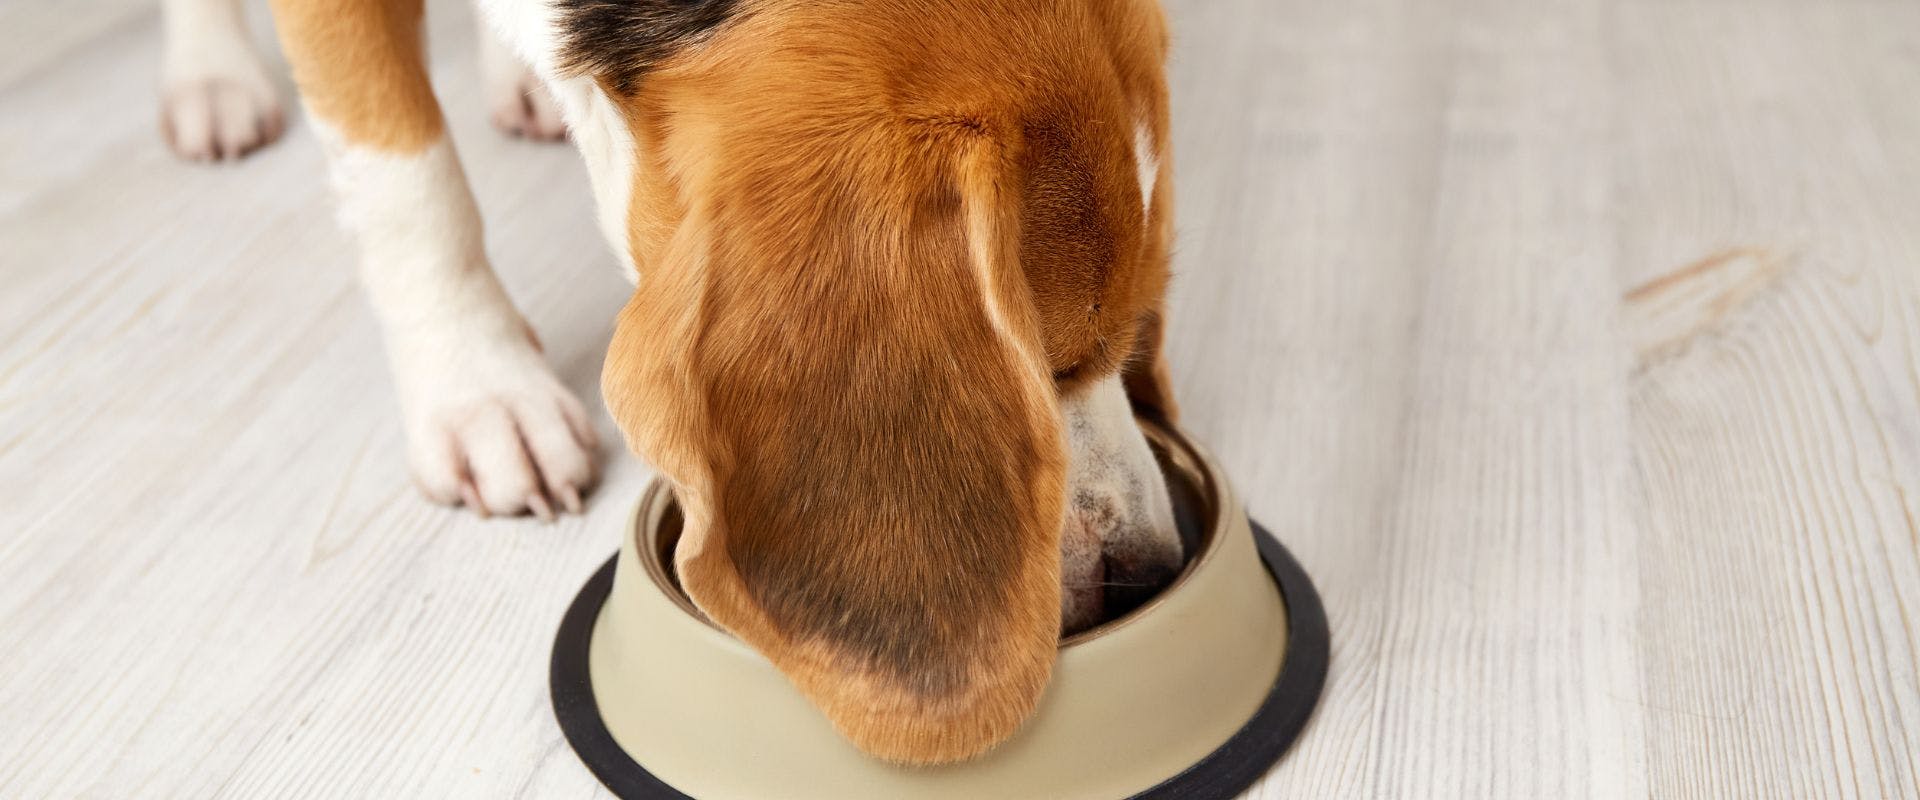 Beagle eating from bowl